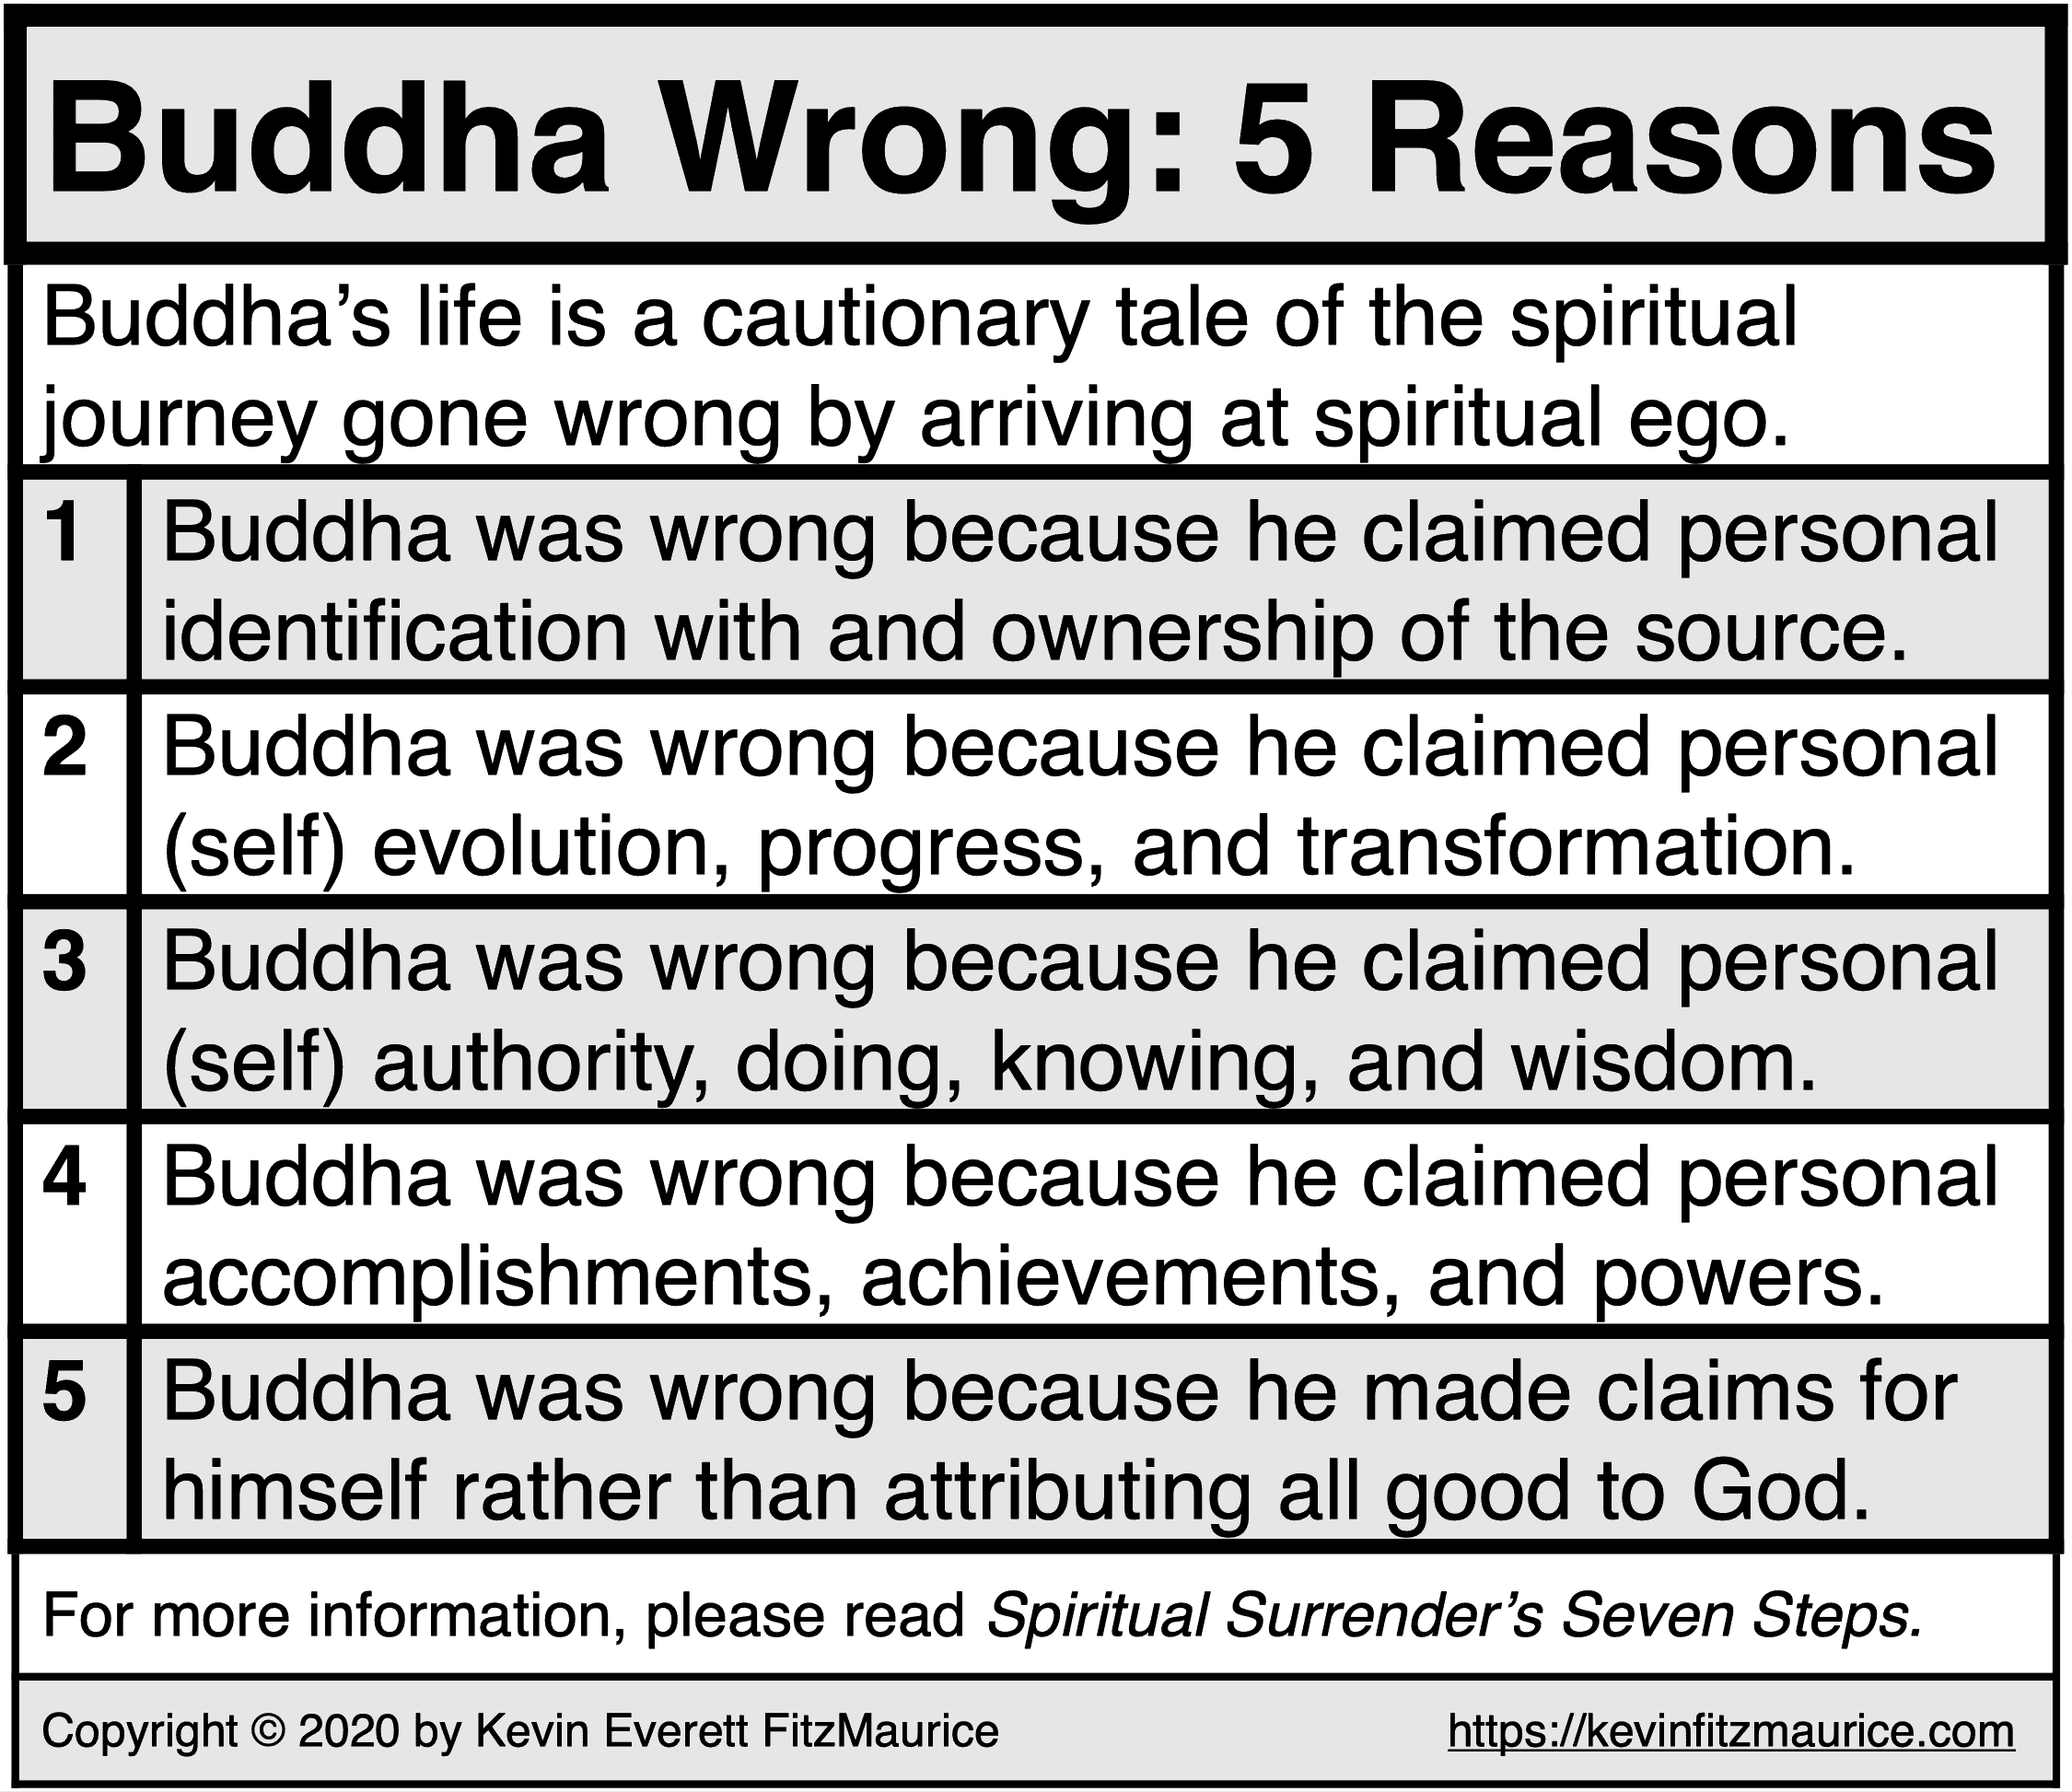 Buddha Was Wrong Because He Claimed for Himself